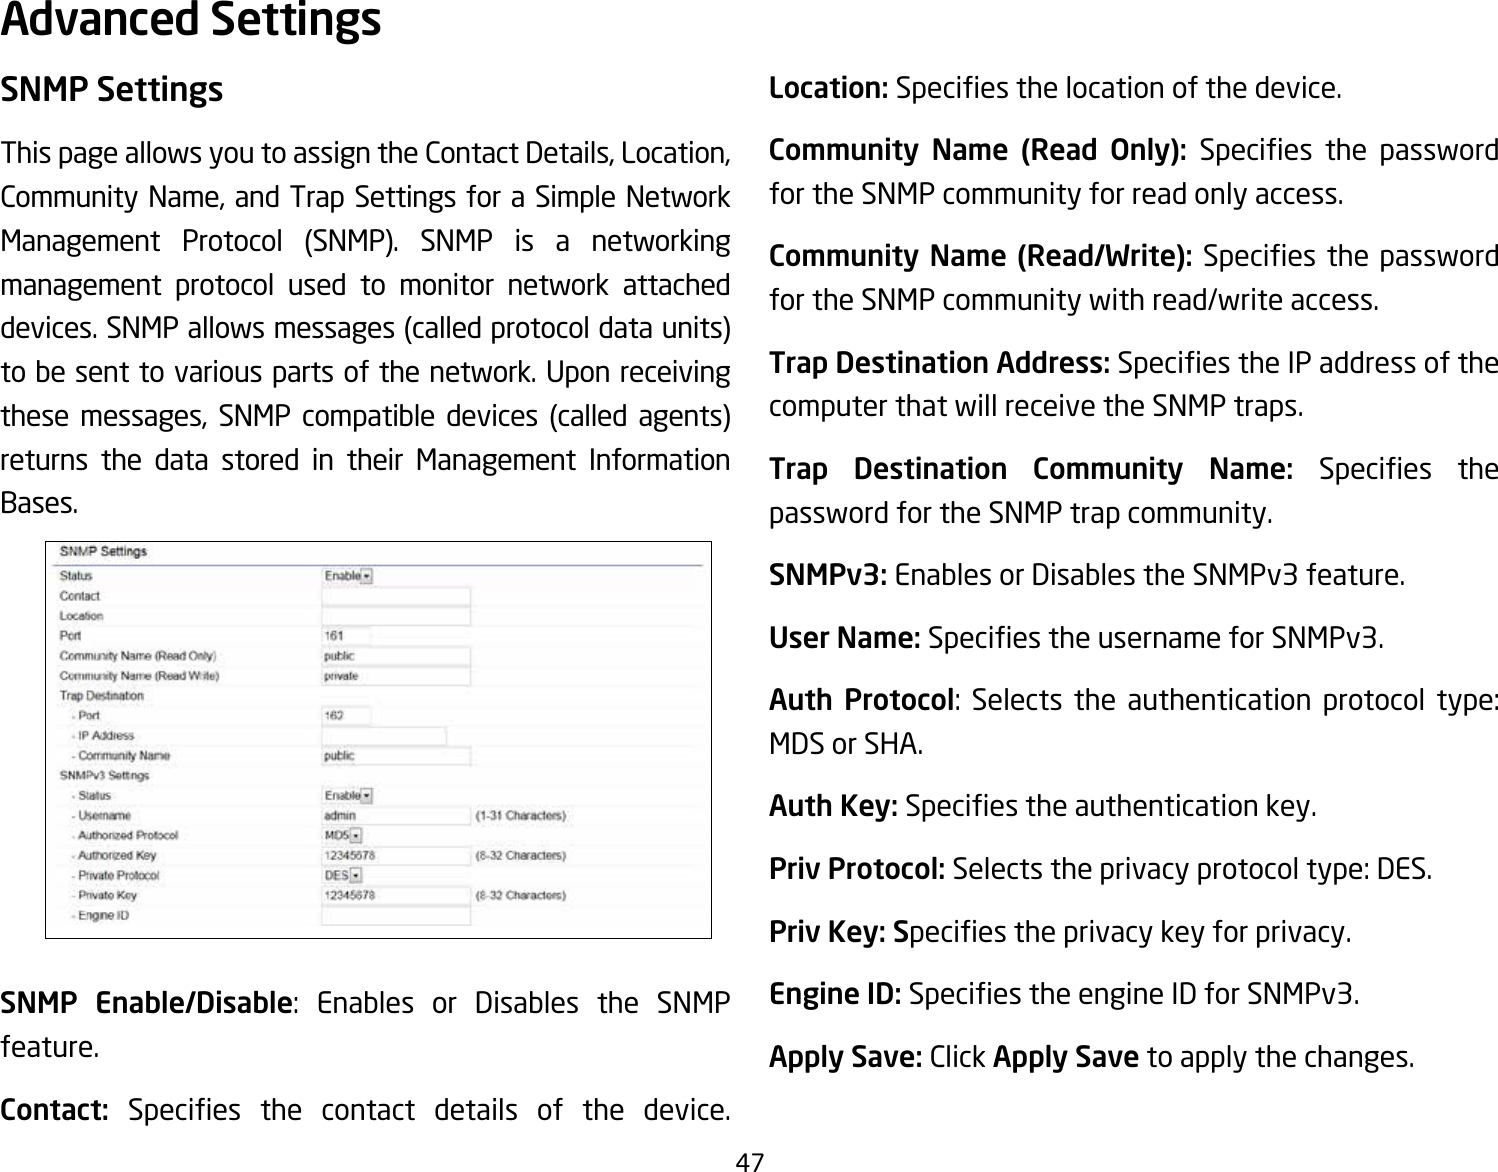 47SNMP SettingsThis page allows you to assign the Contact Details, Location, Community Name, and Trap Settings for a Simple Network Management Protocol (SNMP). SNMP is a networking management protocol used to monitor network attached devices. SNMP allows messages (called protocol data units) tobesenttovariouspartsofthenetwork.Uponreceivingthese messages, SNMP compatible devices (called agents) returns the data stored in their Management Information Bases.SNMP Enable/Disable: Enables or Disables the SNMP feature.Contact:  Species the contact details of the device.Location: Speciesthelocationofthedevice.Community  Name  (Read  Only):  Species the passwordfor the SNMP community for read only access.Community Name (Read/Write):Species thepasswordfor the SNMP community with read/write access.Trap Destination Address:SpeciestheIPaddressofthecomputer that will receive the SNMP traps.Trap  Destination  Community  Name:  Species thepassword for the SNMP trap community.SNMPv3: Enables or Disables the SNMPv3 feature.User Name:SpeciestheusernameforSNMPv3.Auth Protocol: Selects the authentication protocol type: MDS or SHA.Auth Key: Speciestheauthenticationkey.Priv Protocol: Selects the privacy protocol type: DES.Priv Key: Speciestheprivacykeyforprivacy.Engine ID: SpeciestheengineIDforSNMPv3.Apply Save: Click Apply Save to apply the changes.Advanced Settings